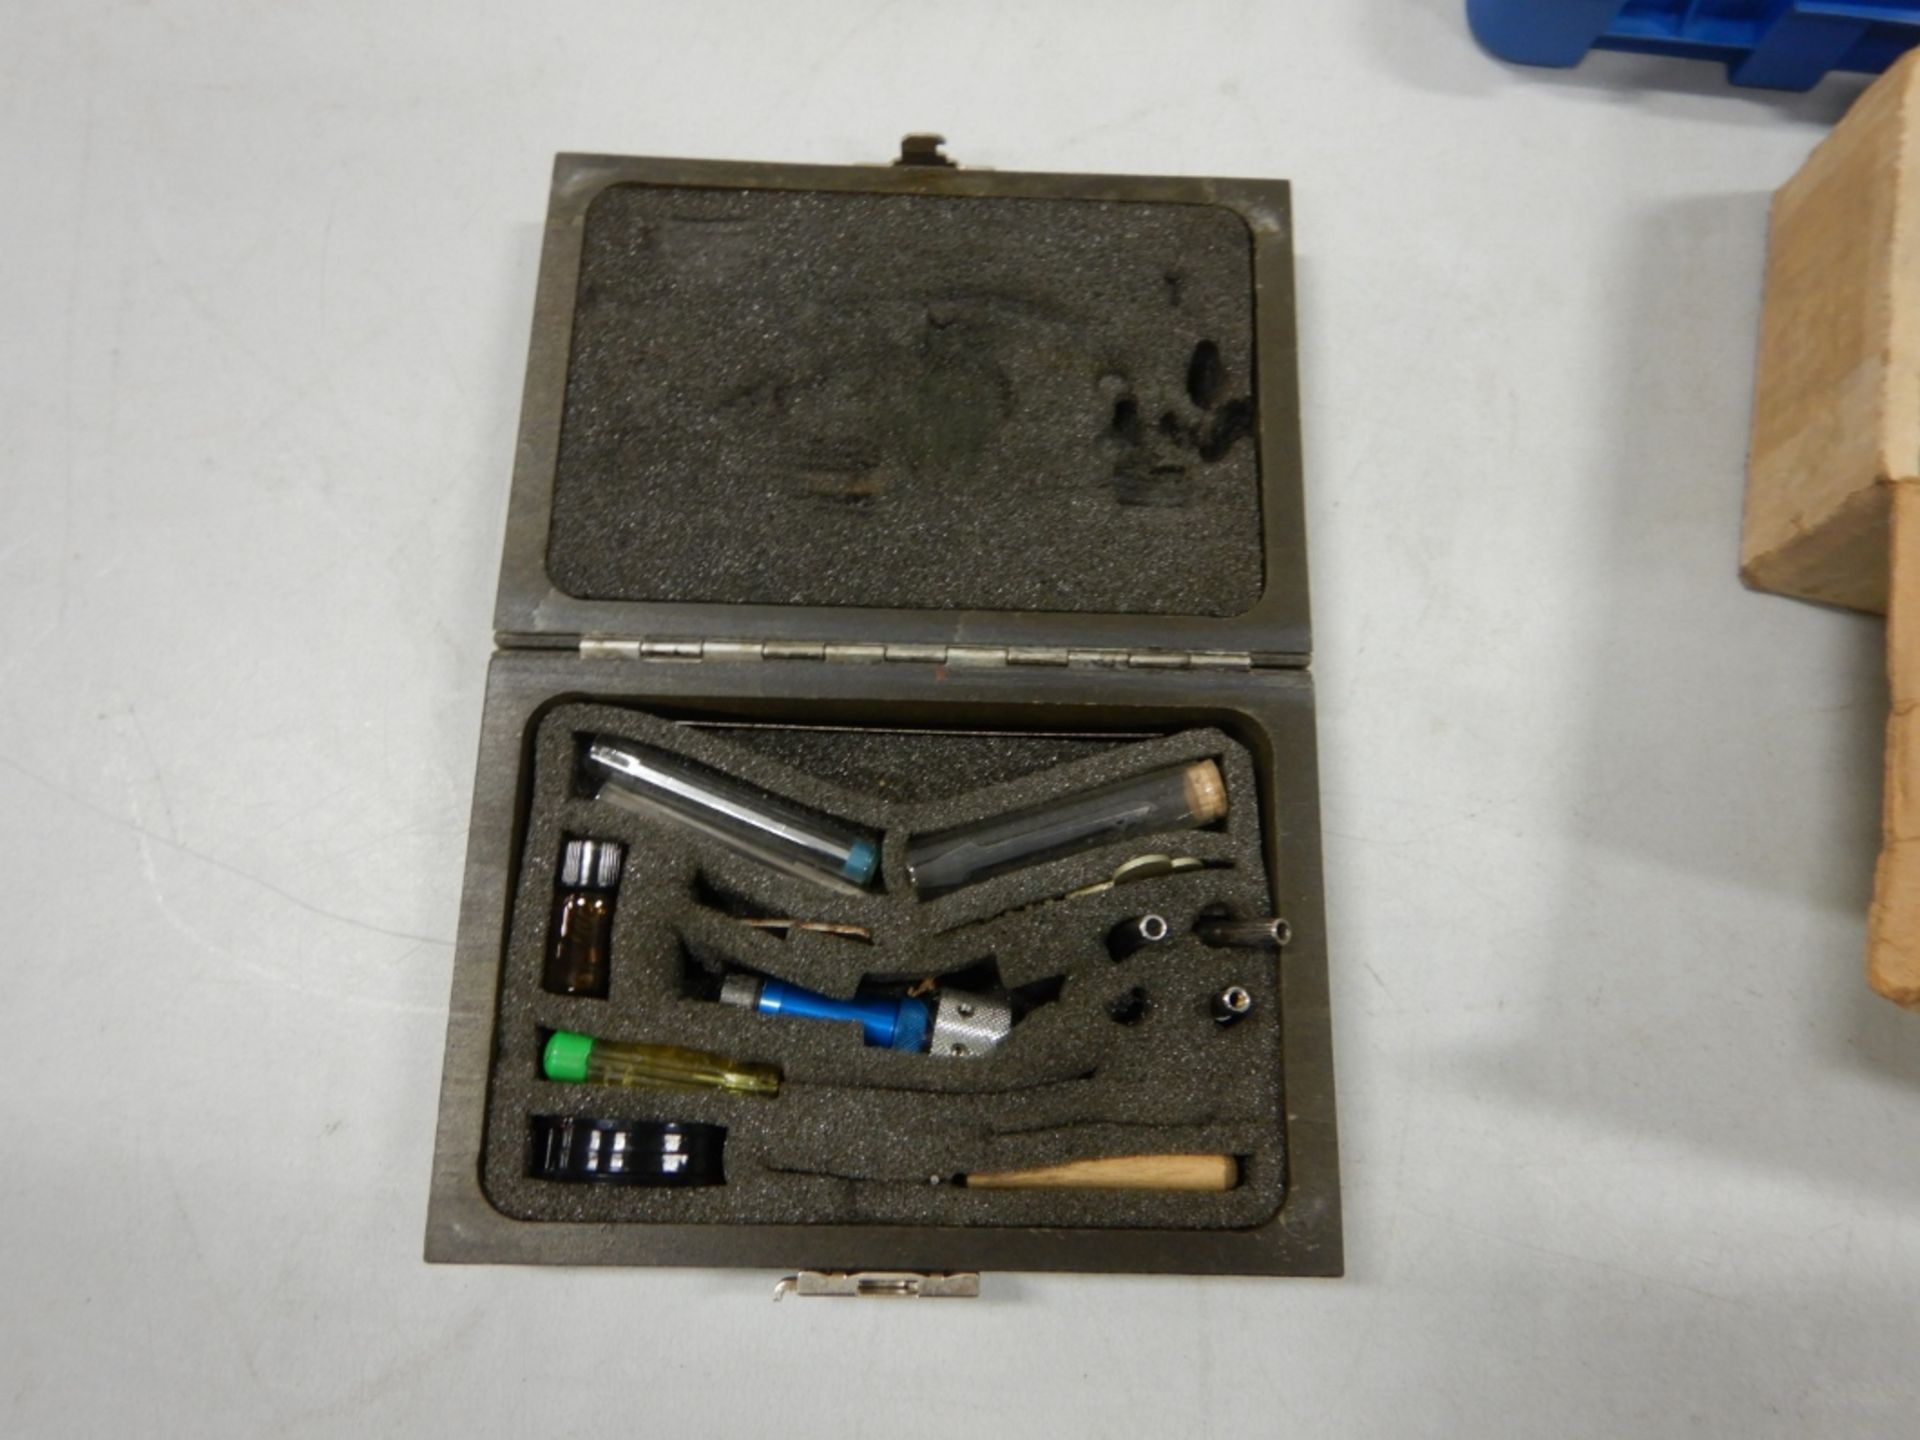 PICKMASTERS KIT, CYLINDER THREADING TOOL, "DO NOT COPY" STAMP TOOL, MATRICOLA 1907011980502 KIT - Image 6 of 7